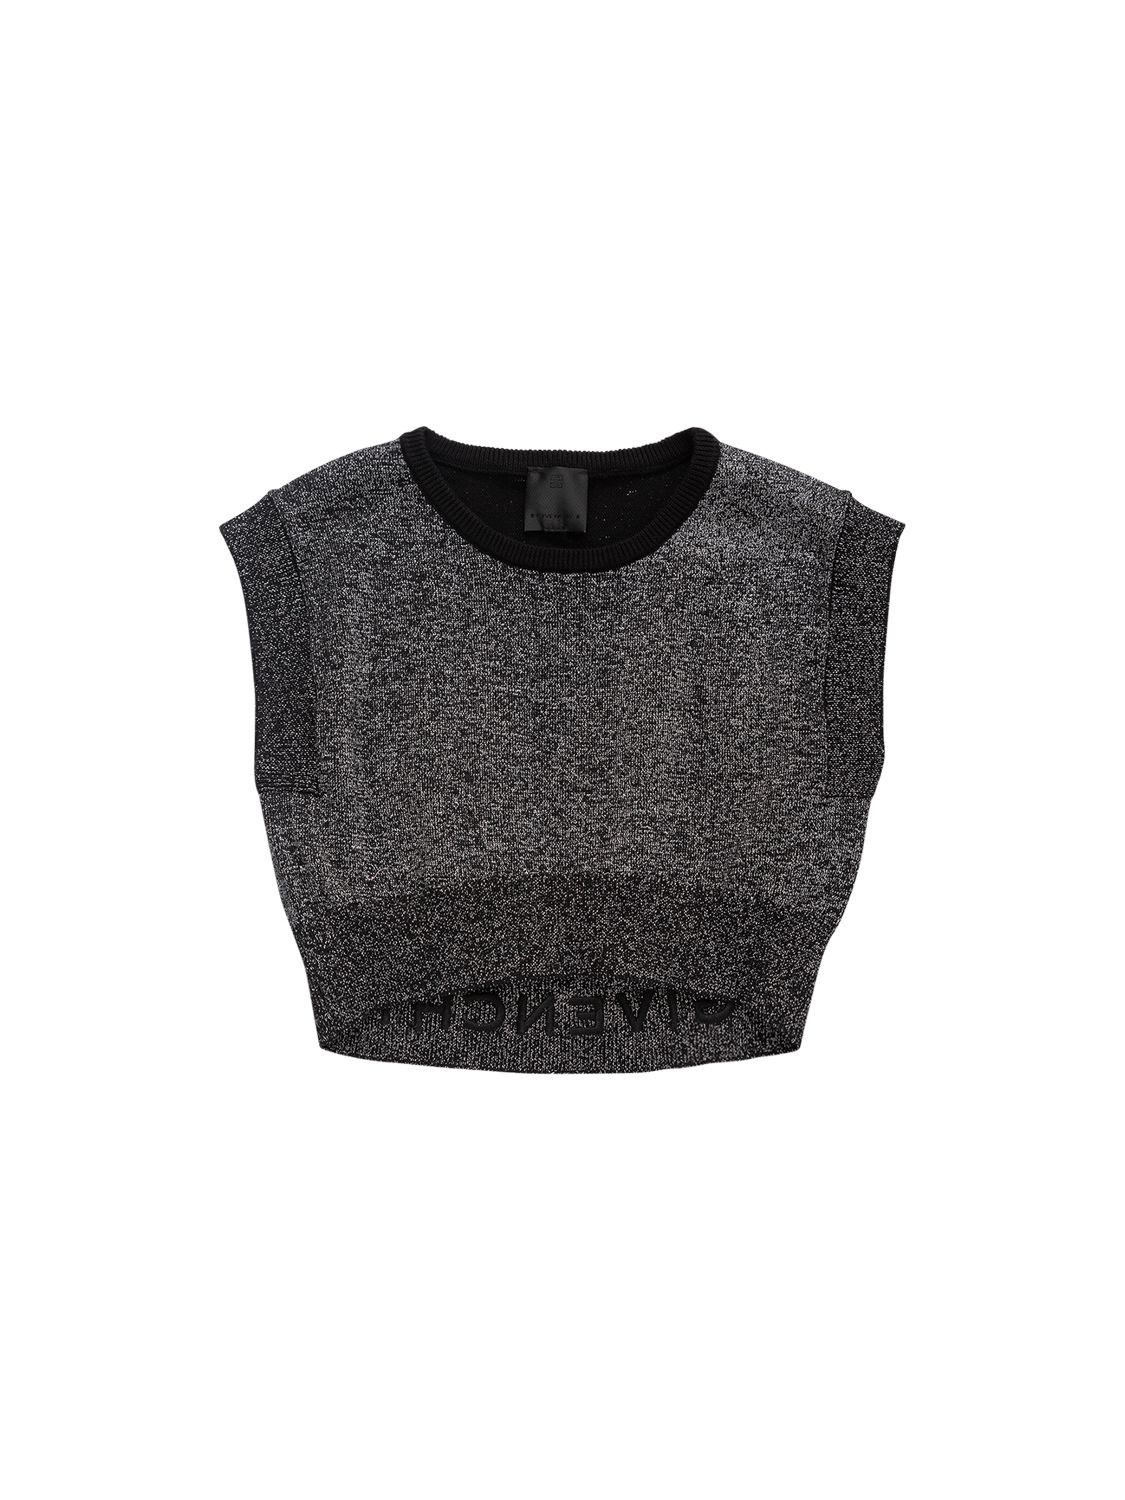 Givenchy Lurex Knit Cropped Top In Black